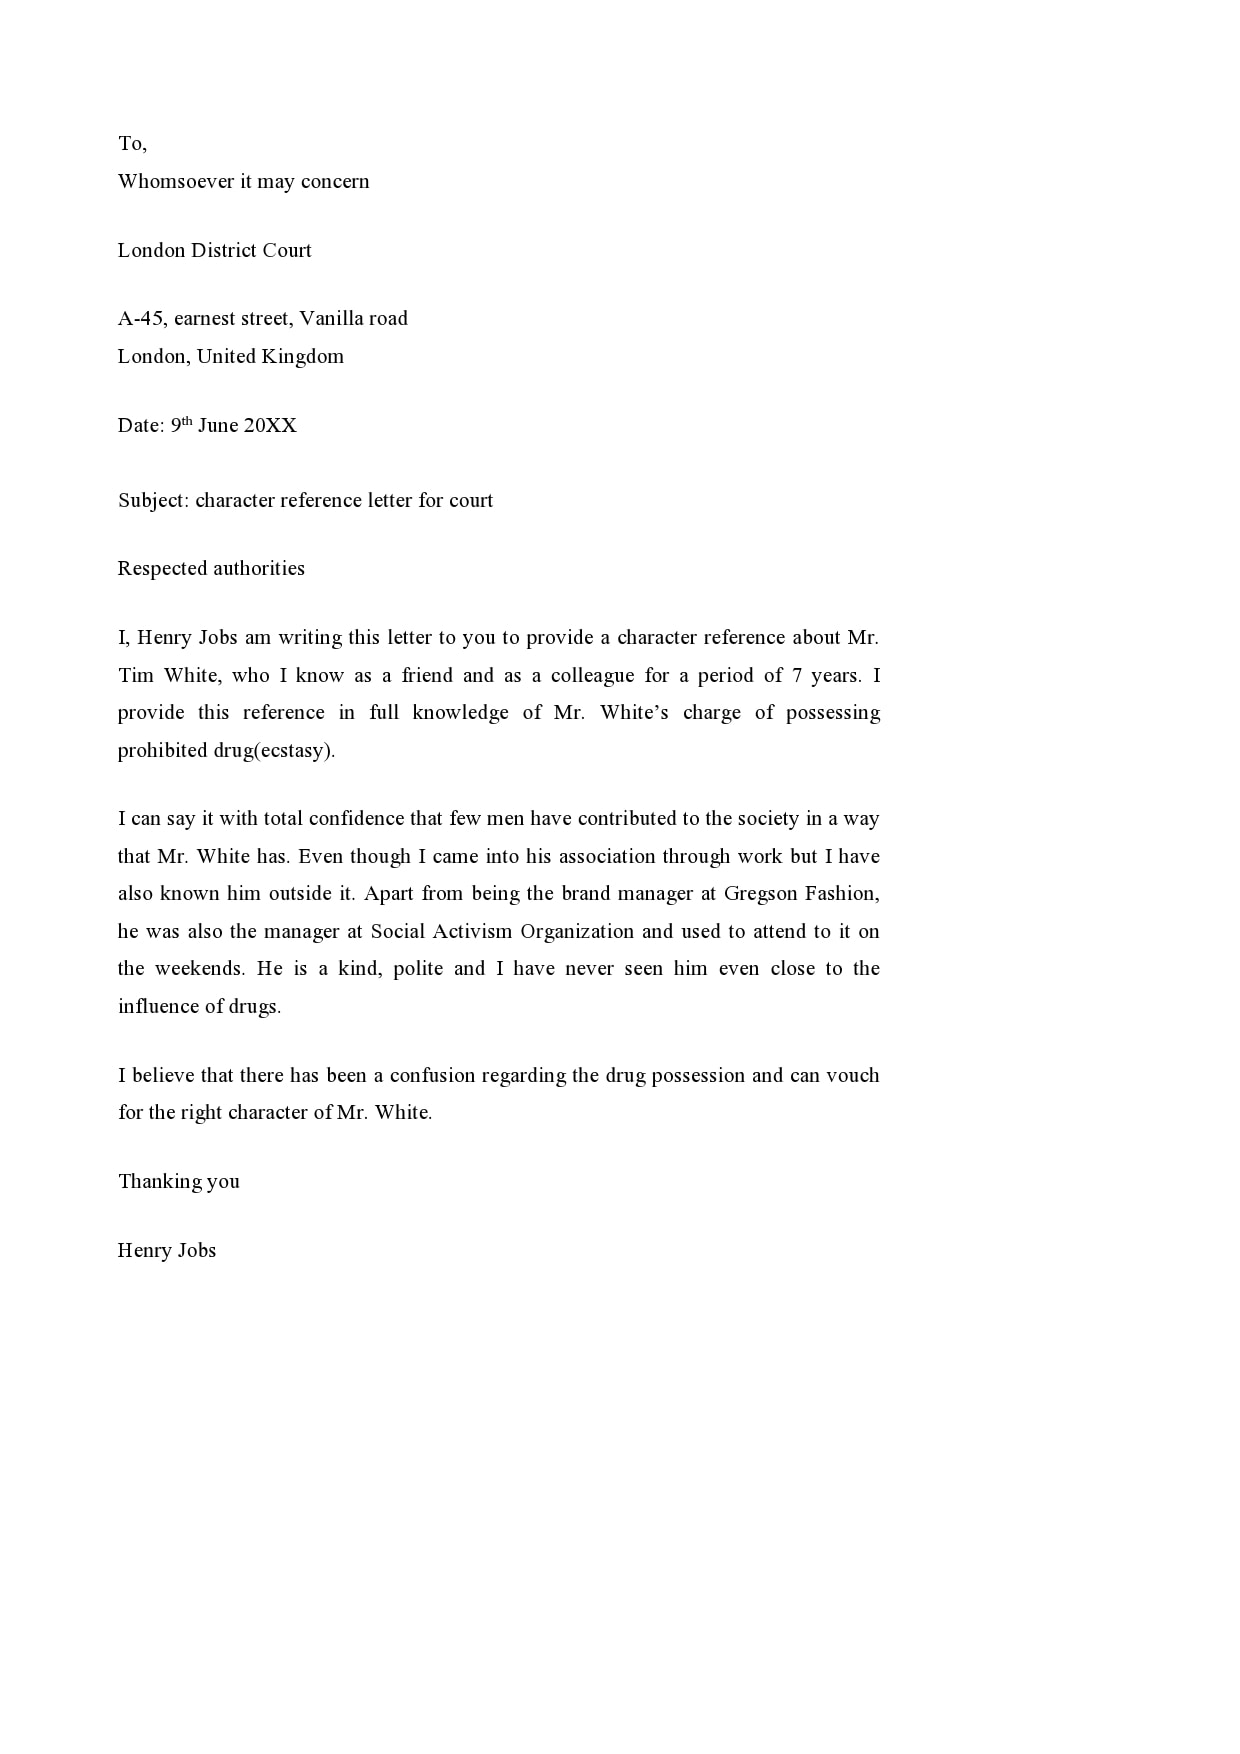 Microsoft Word Reference Letter Template from templatearchive.com